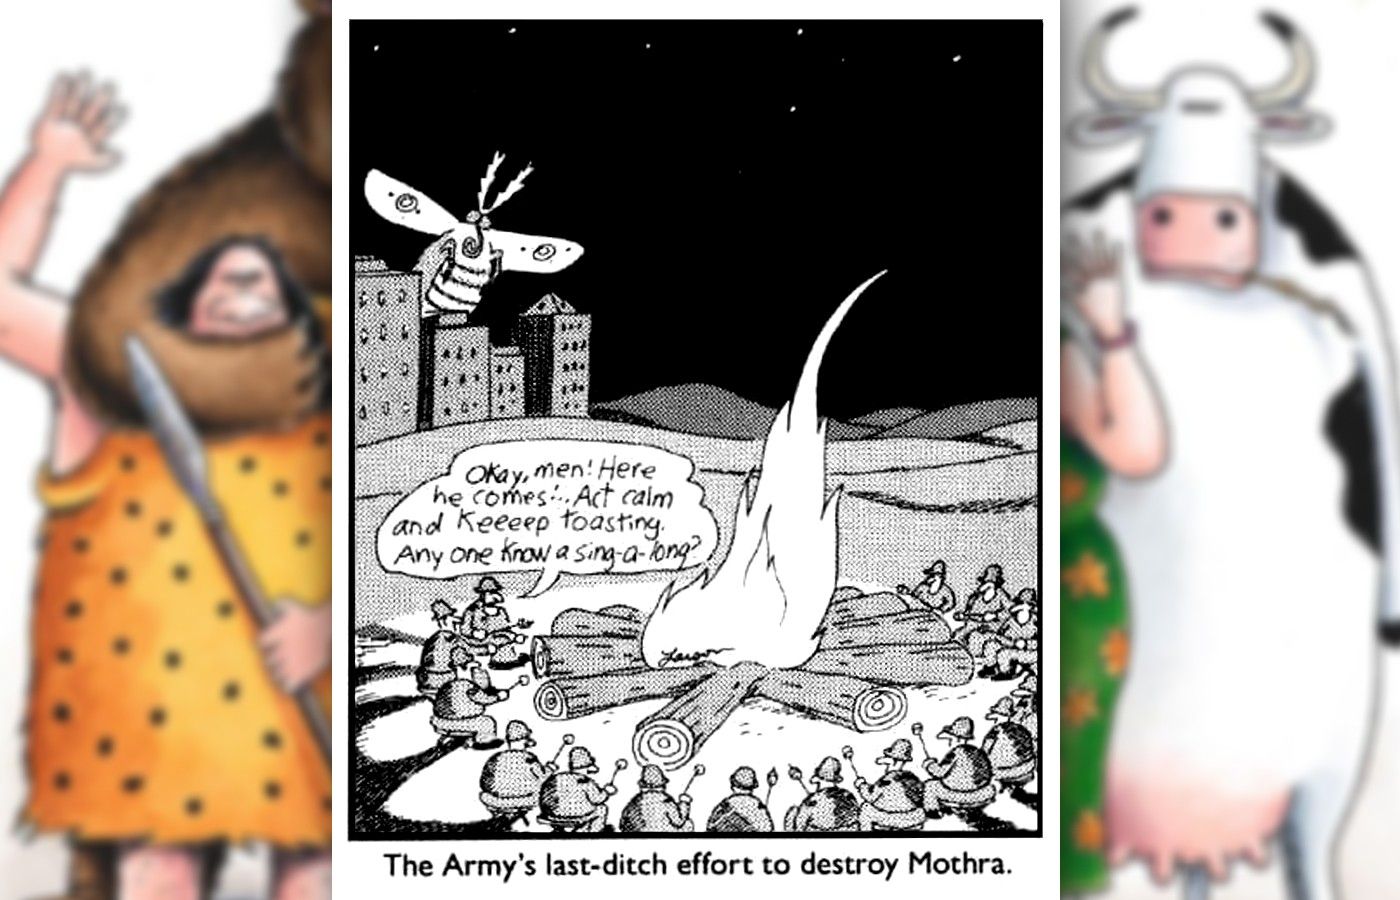 the far side comic where the army try to kill mothra by setting a huge bonfire, attracting it because it's a moth